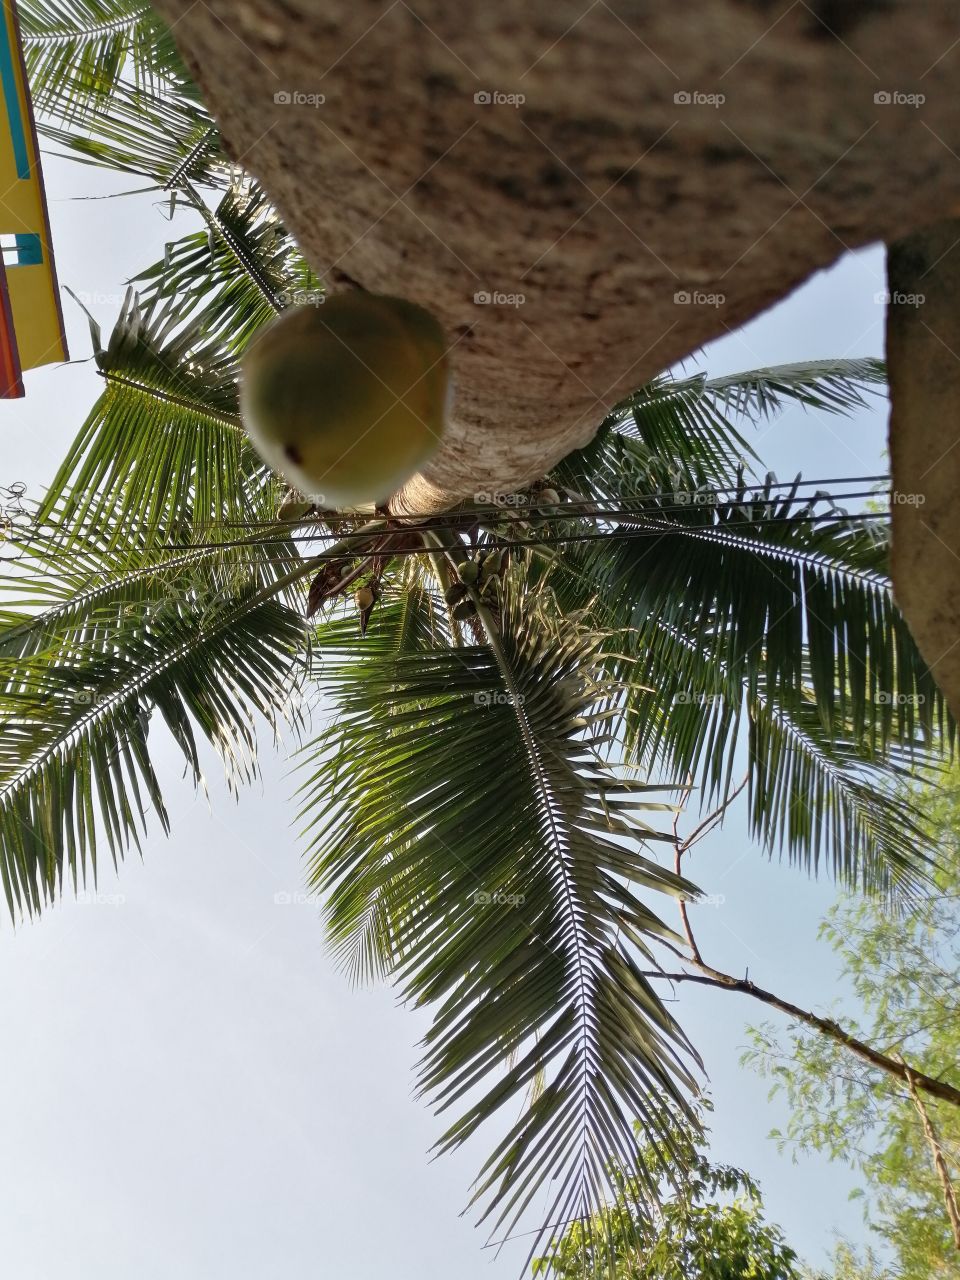 Coconut from the tree